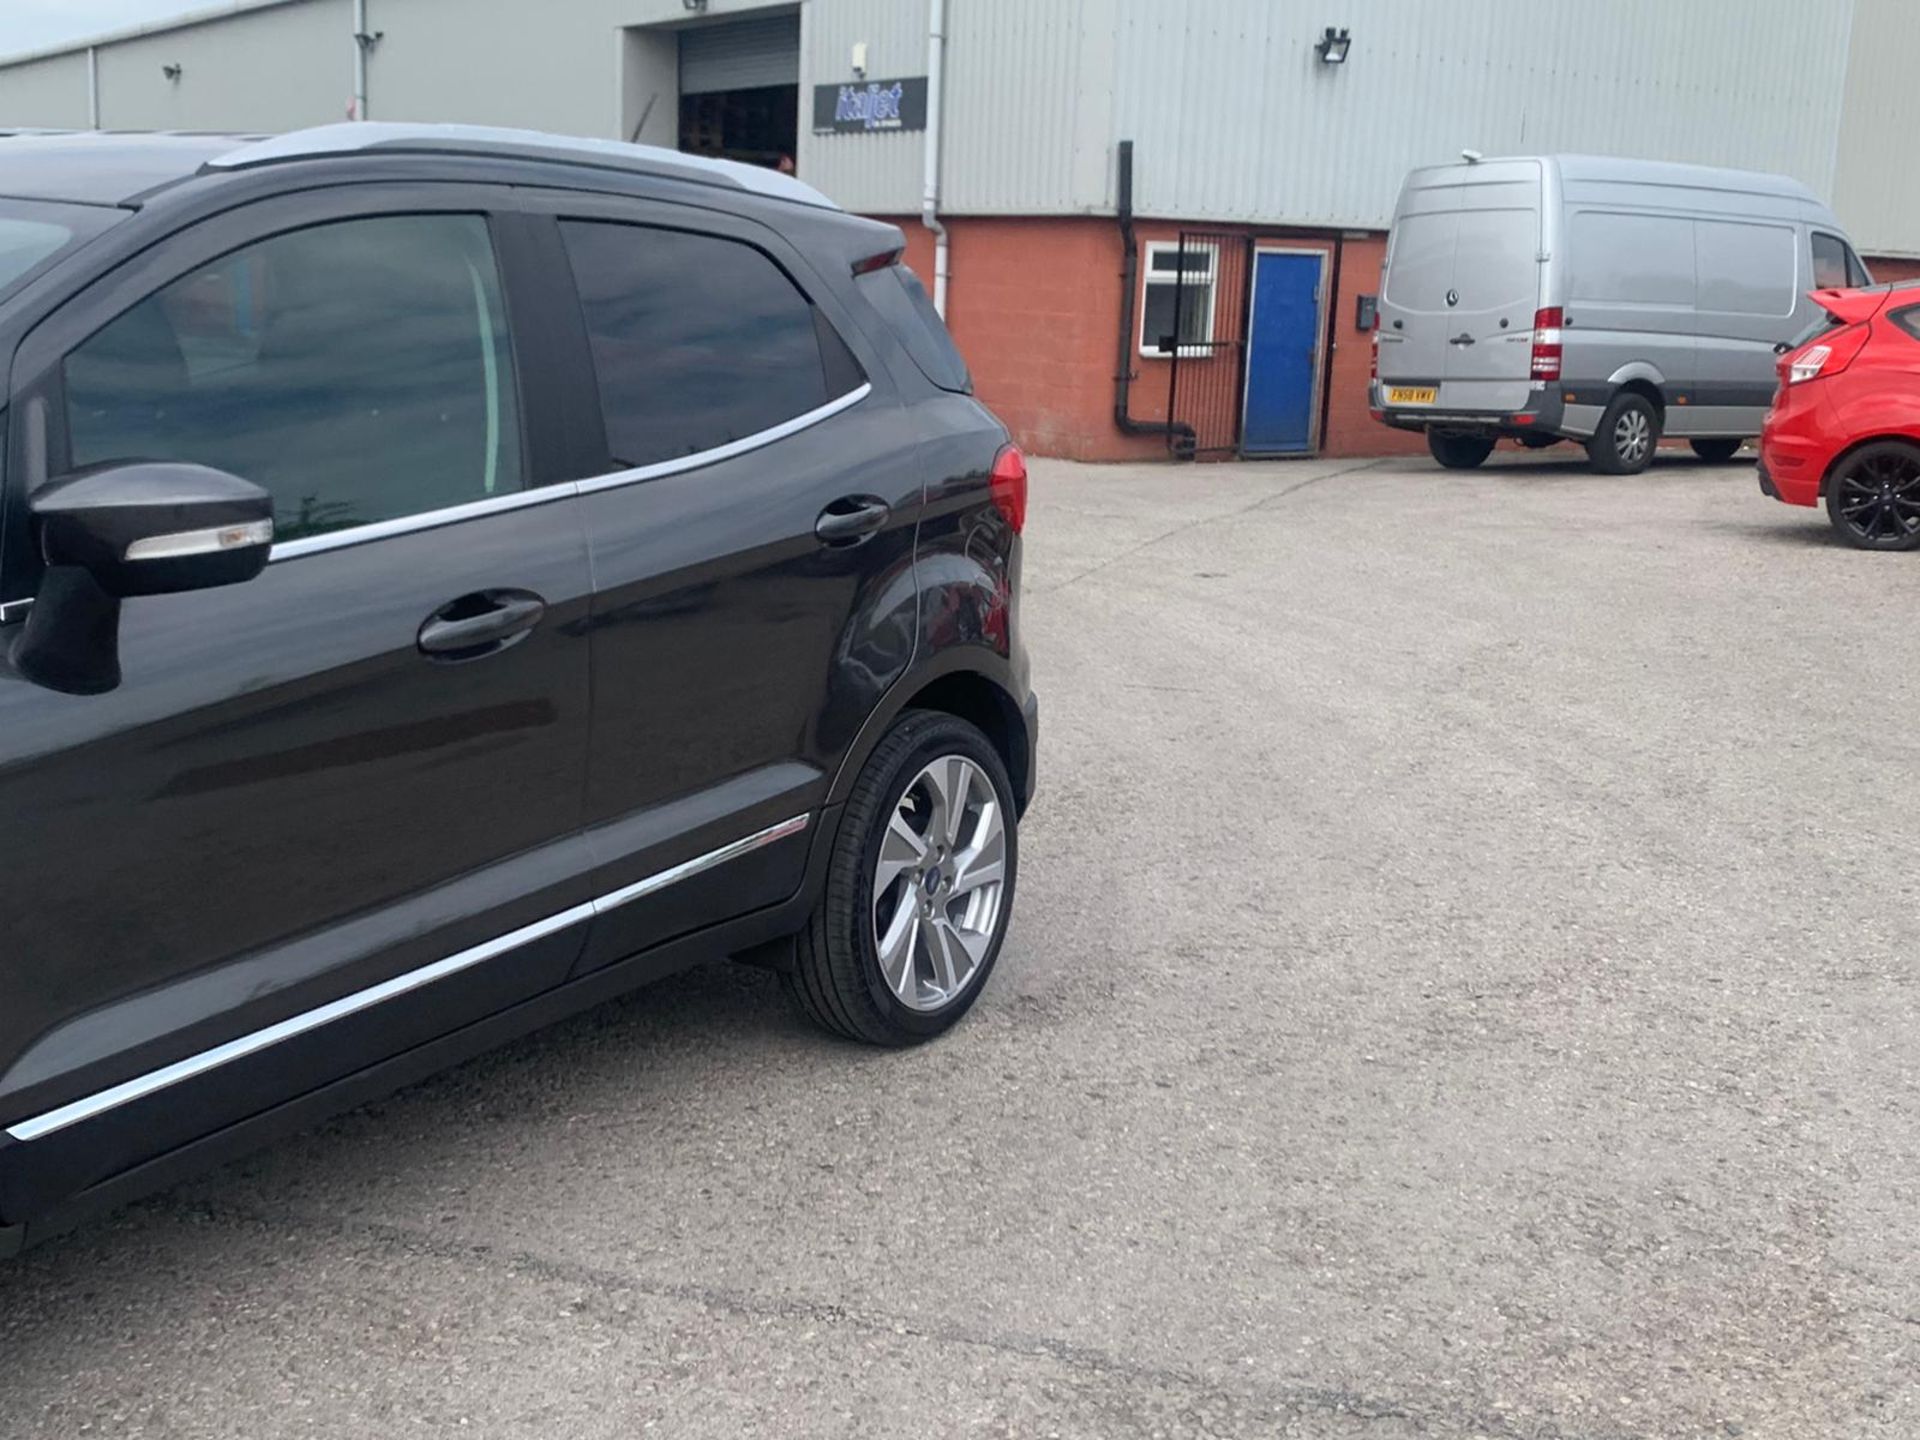 2019/19 REG FORD ECOSPORT TITANIUM 998CC PETROL 125BHP 5DR, SHOWING 0 FORMER KEEPERS *NO VAT* - Image 4 of 14